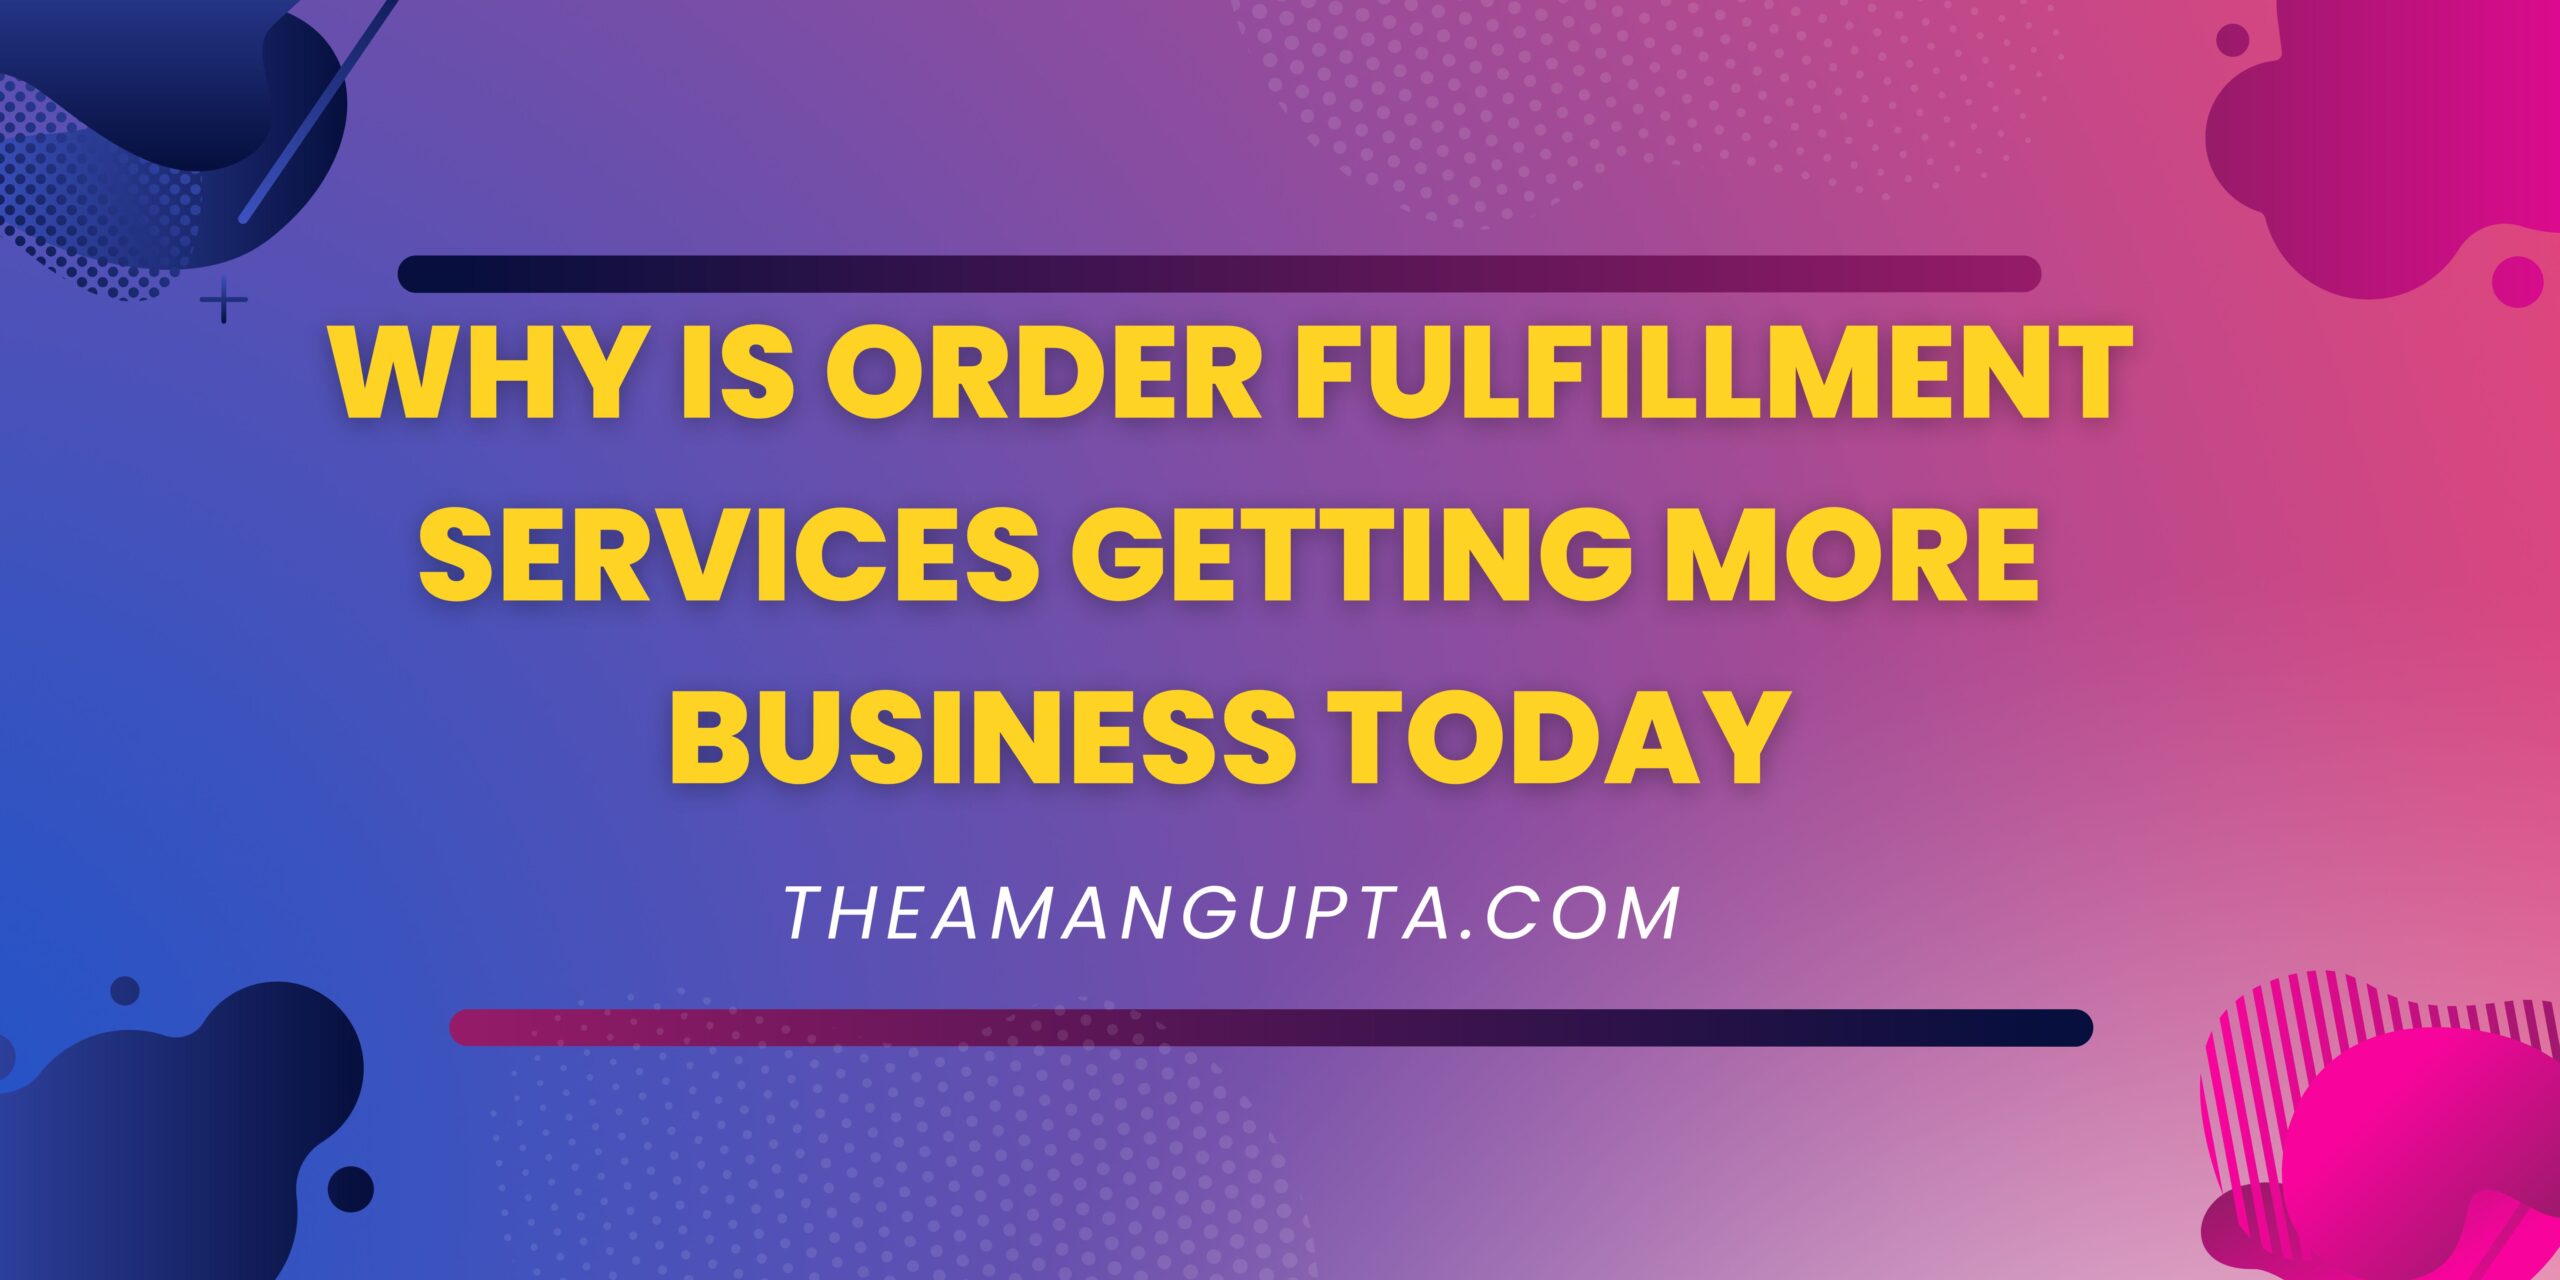 Why Is Order Fulfillment Services Getting More Business Today|Why Is Order Fulfillment Services Getting More Business Today|Theamangupta|Theamangupta